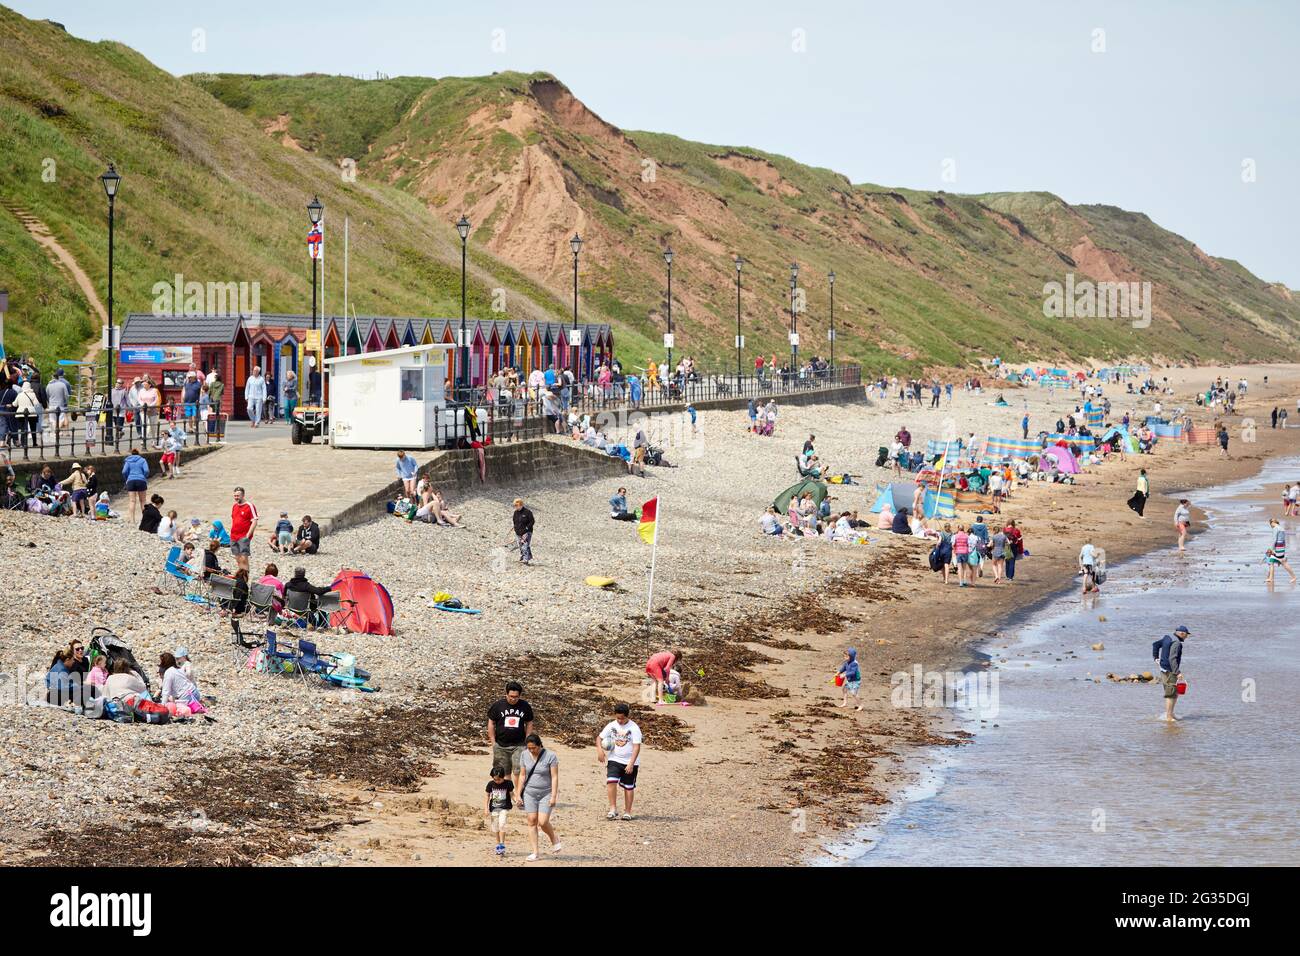 Saltburn-by-the-Sea, seaside town in Redcar and Cleveland, North Yorkshire, England.  BEACH AND HUTS Stock Photo